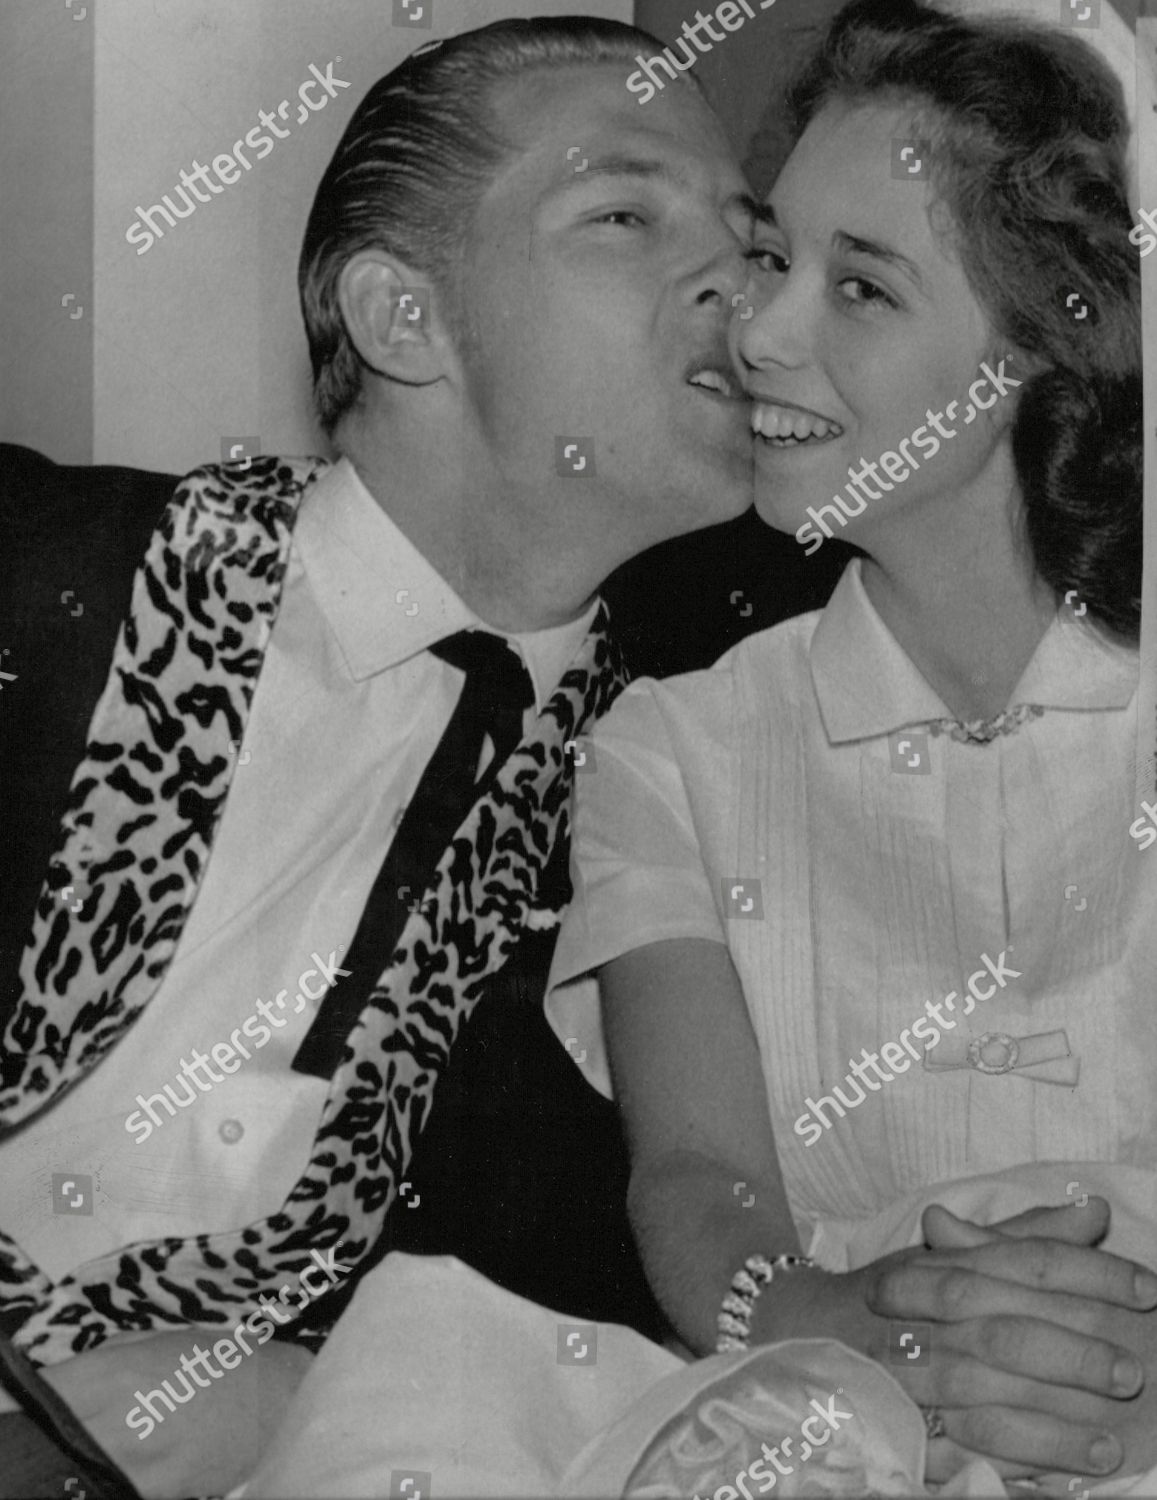 Singer Jerry Lee Lewis His 13yearold Editorial Stock Photo - Stock Image |  Shutterstock